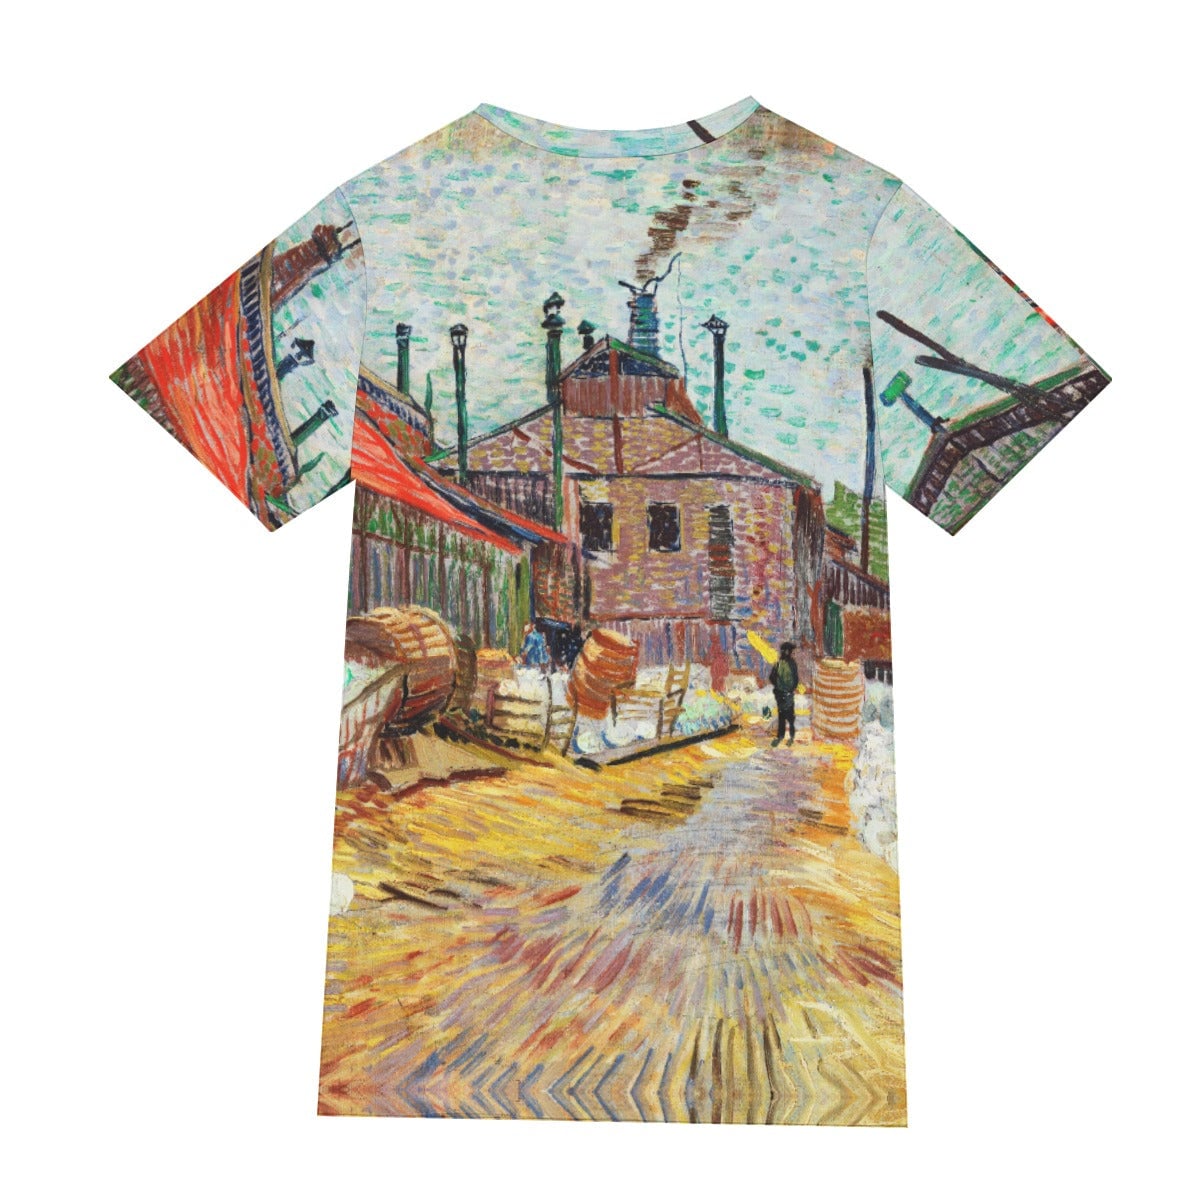 The Factory by Vincent Van Gogh T-Shirt